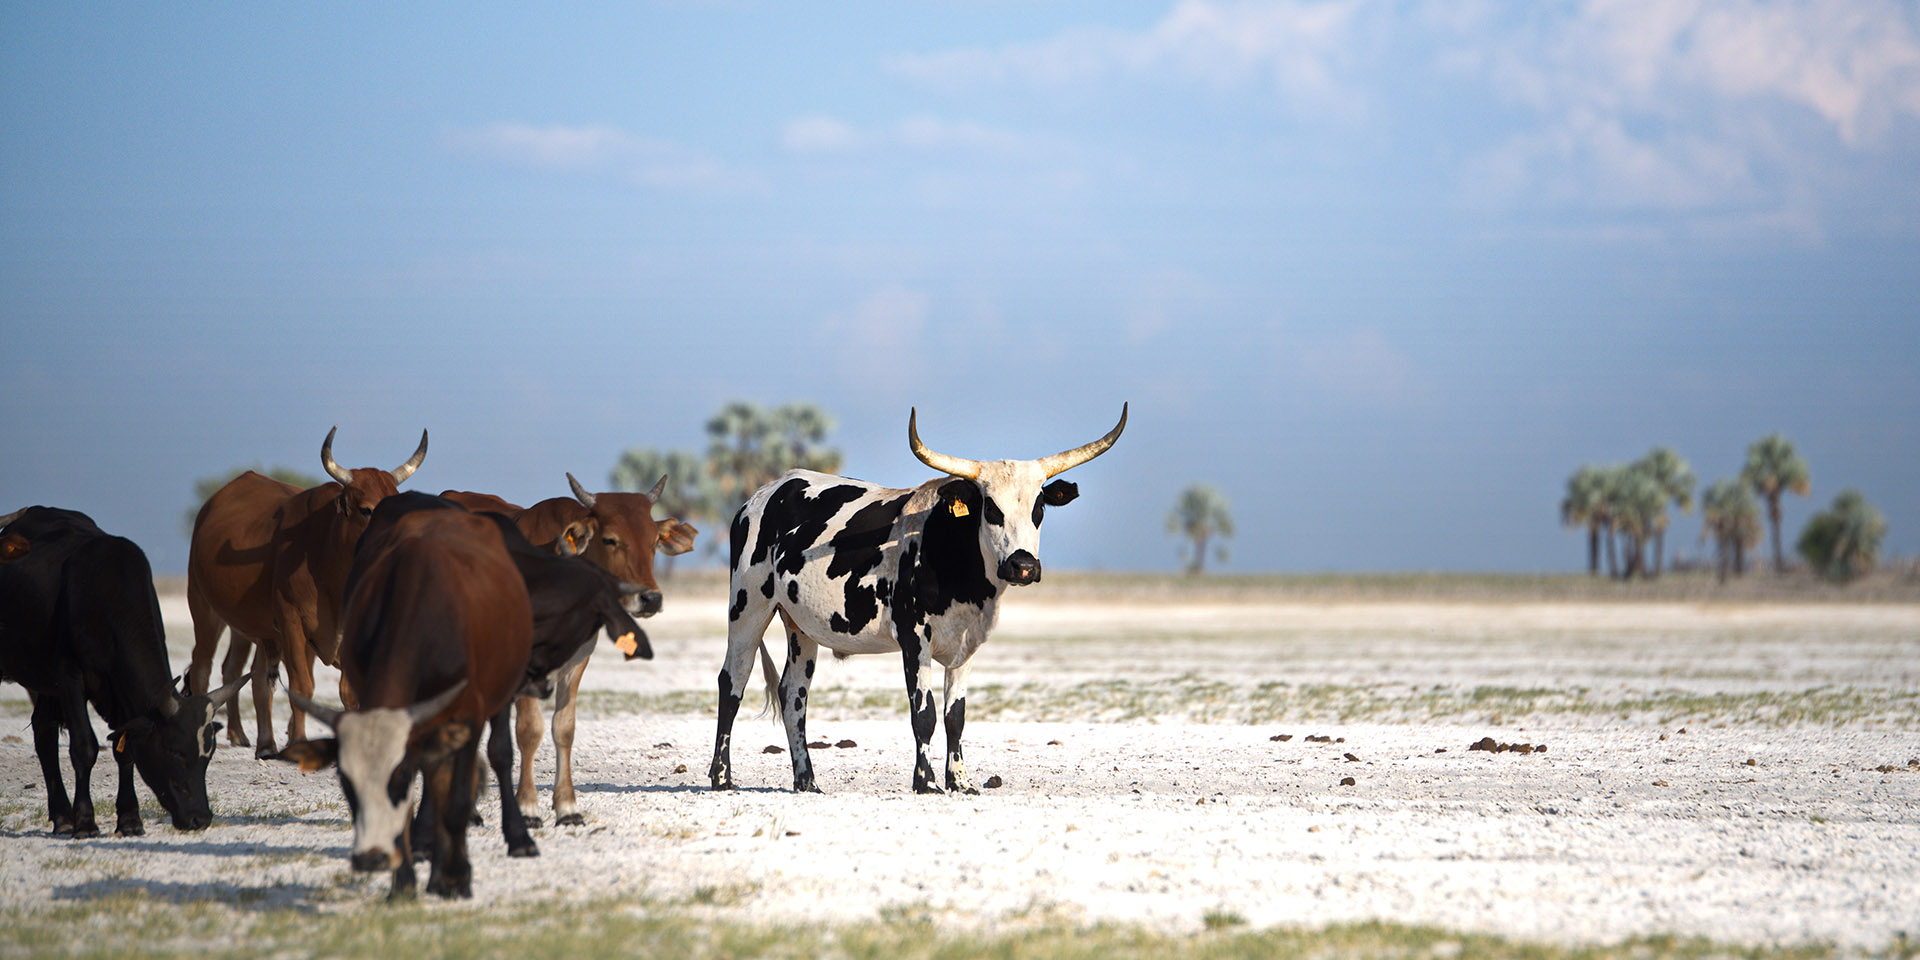 Cattle in Owambo, Namibia